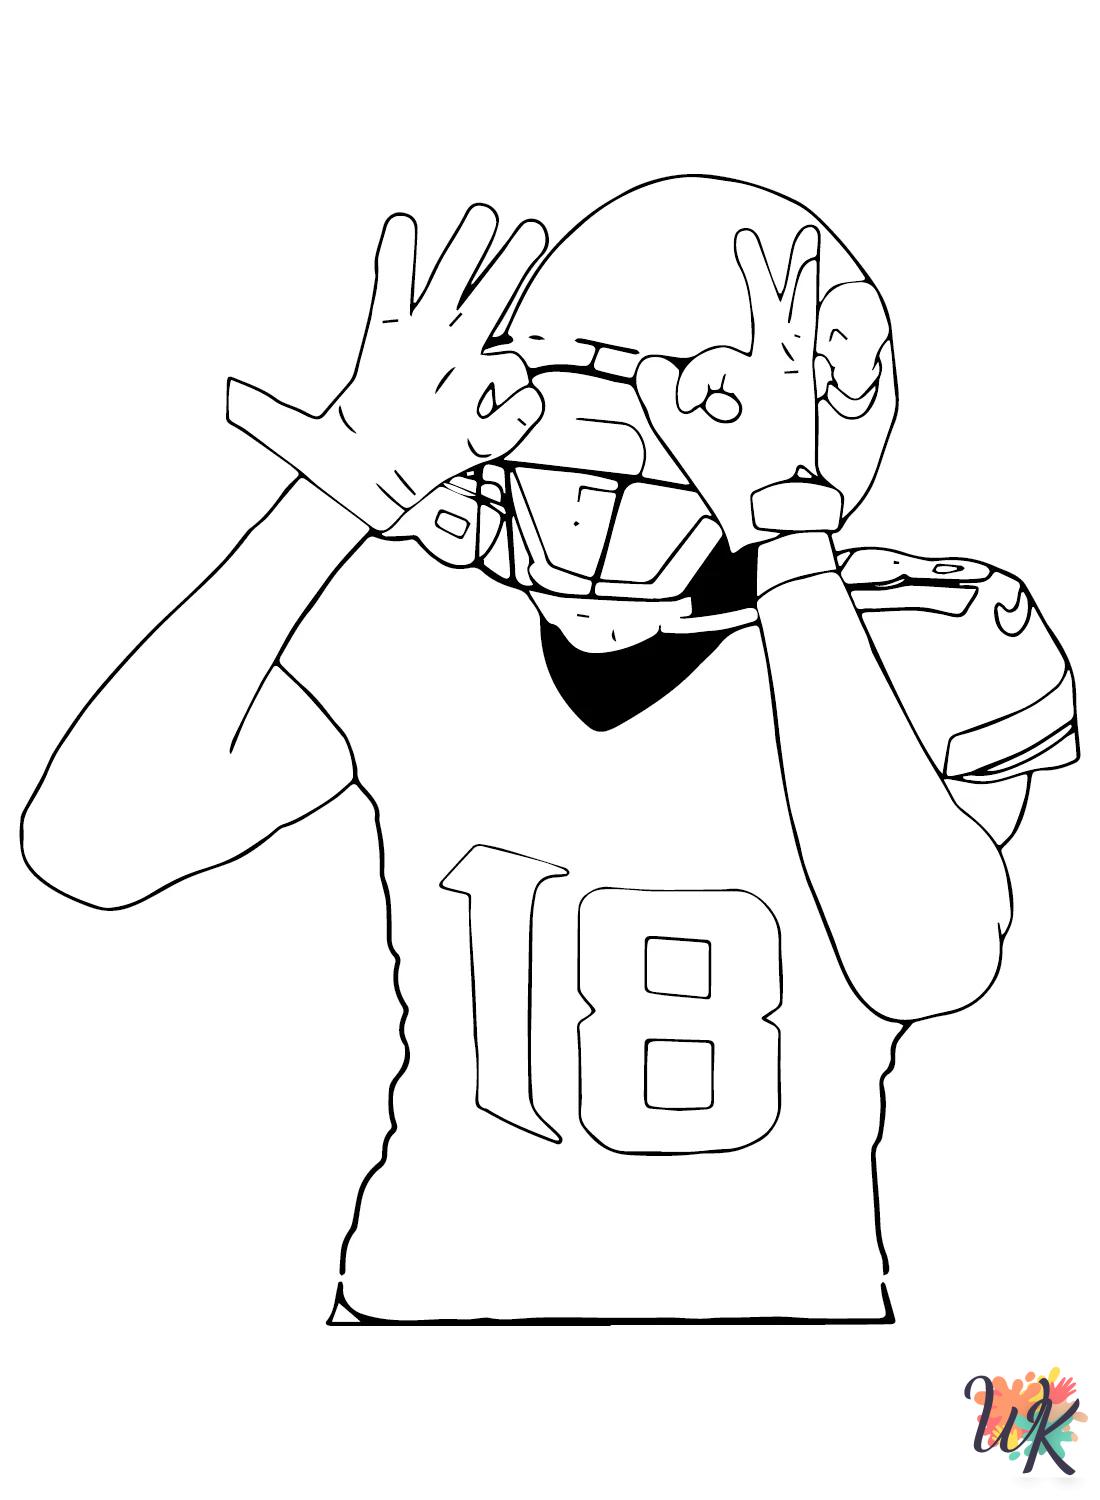 Justin Jefferson themed coloring pages 1